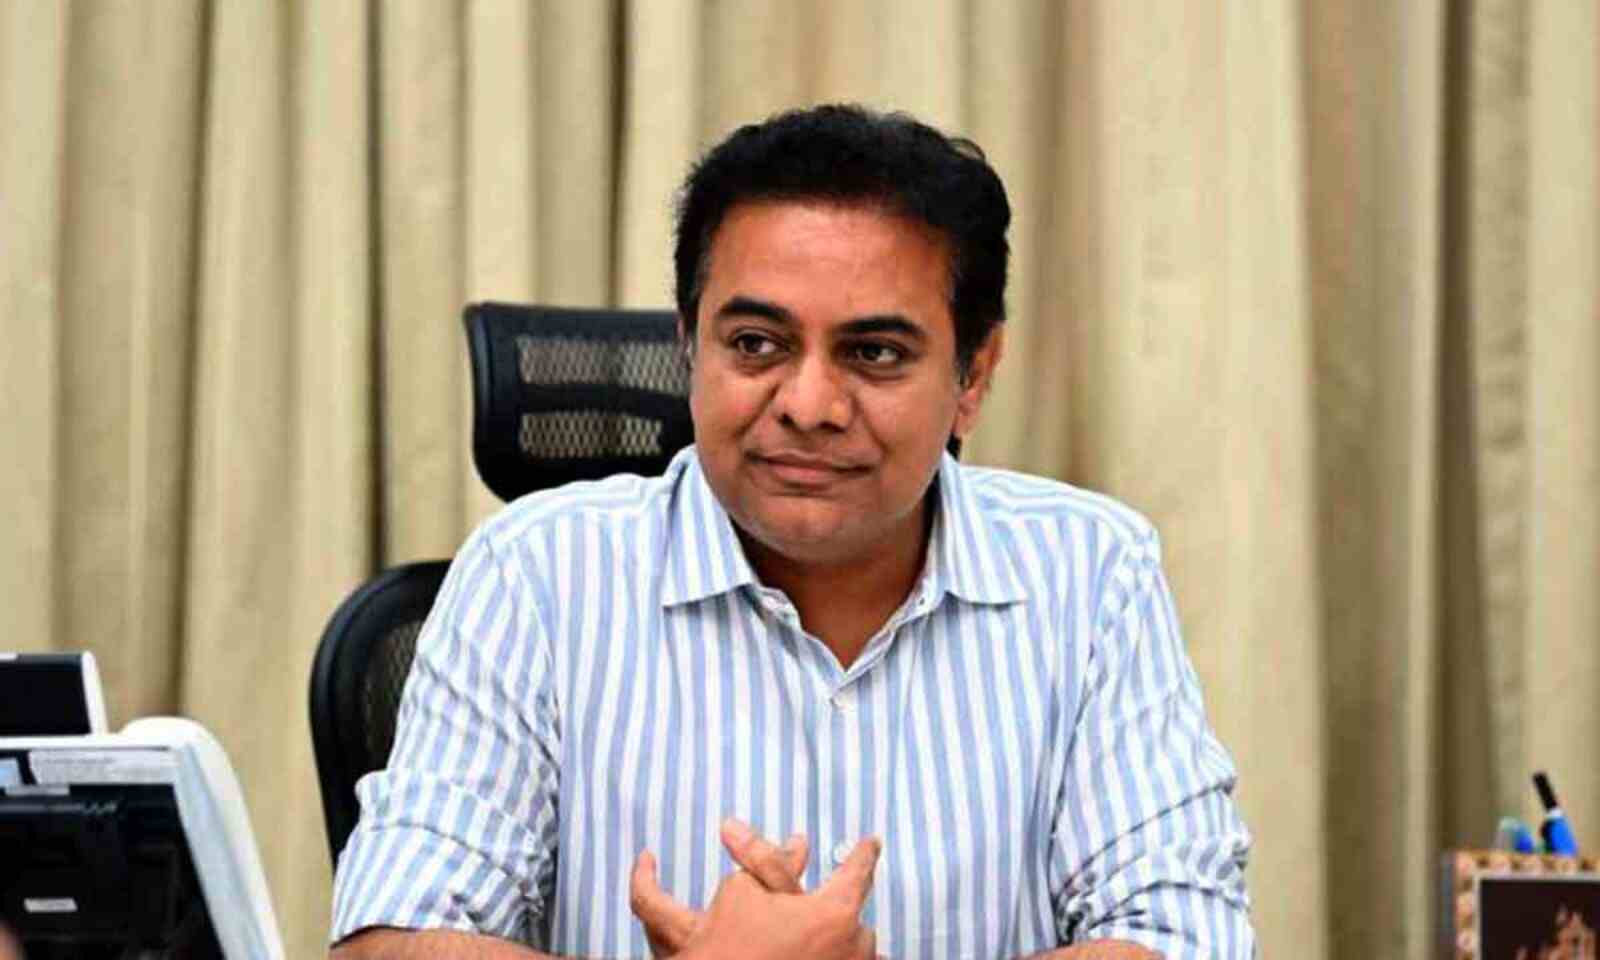 KTR leaves for USA with family. Son to pursue higher studies in ...